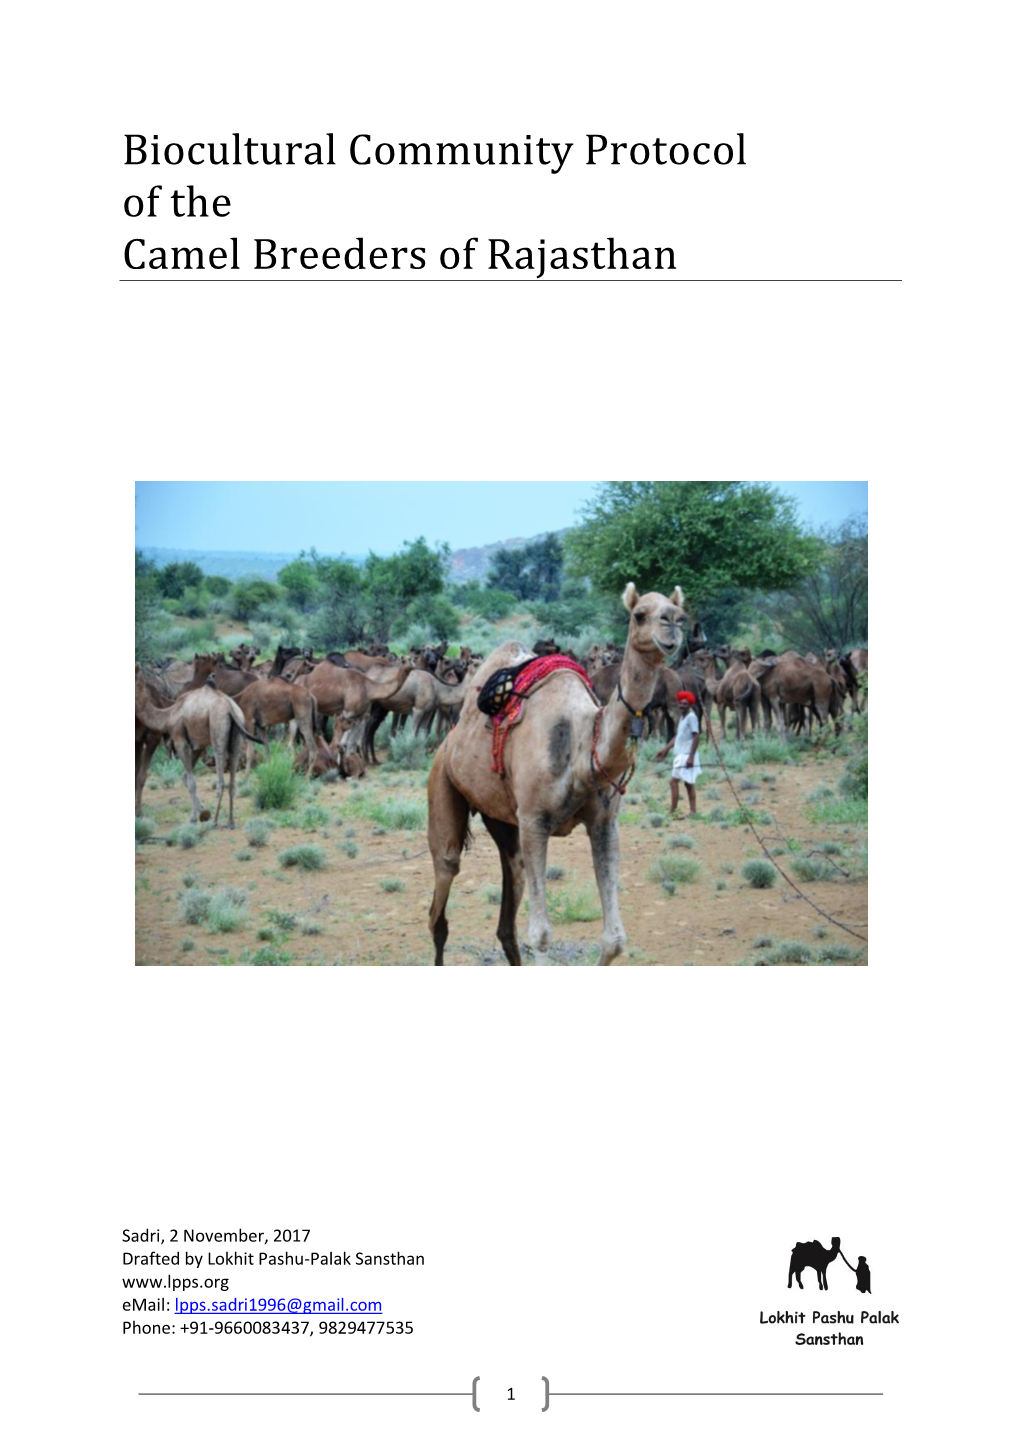 Biocultural Community Protocol of the Camel Breeders of Rajasthan